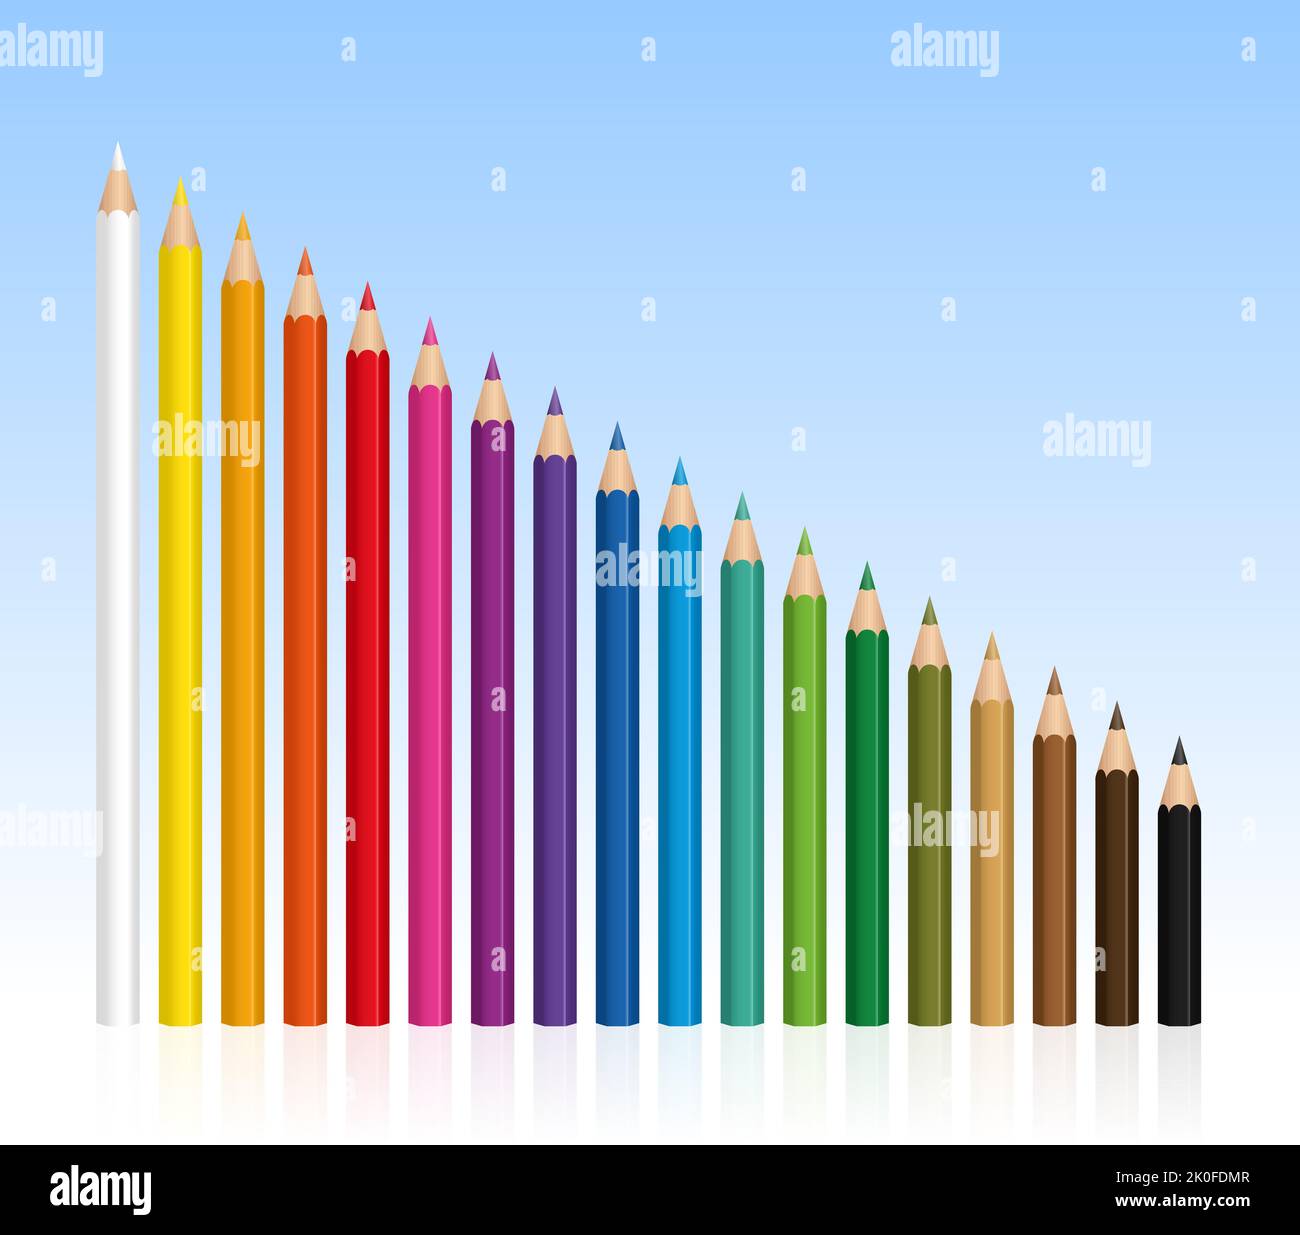 Colored pencils, crayon set with different lengths, getting shorter - illustration blue gradient background. Stock Photo